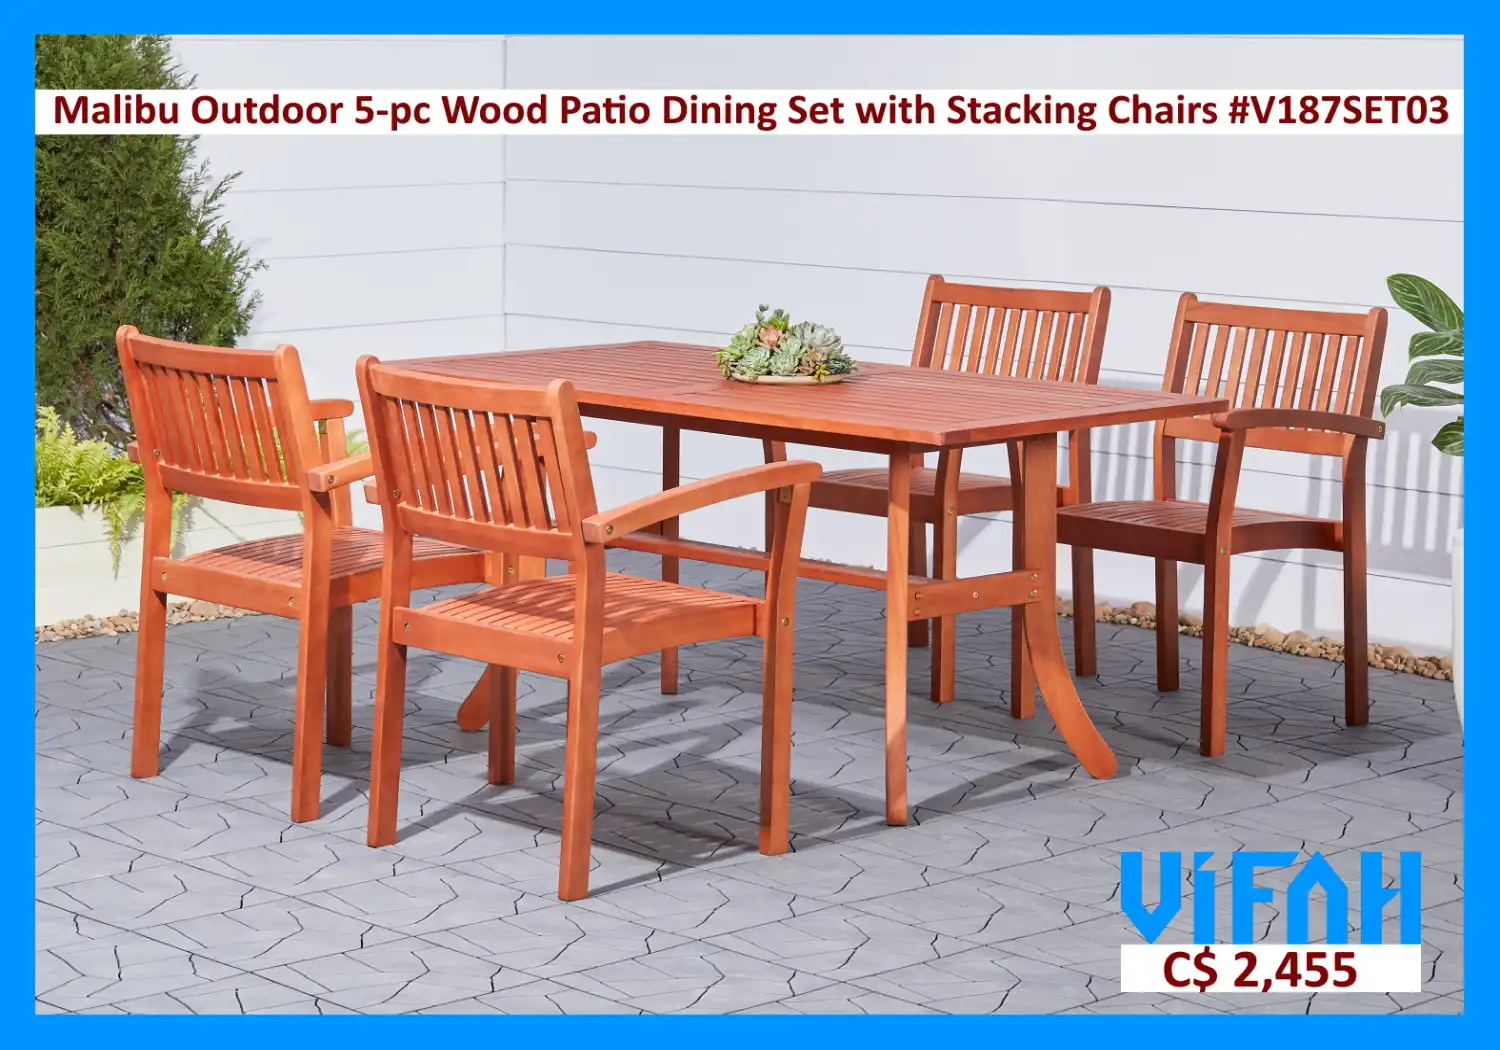 MALIBU Outdoor #V187SET03 5-piece Wood Patio Dining Set with Stacking Chairs